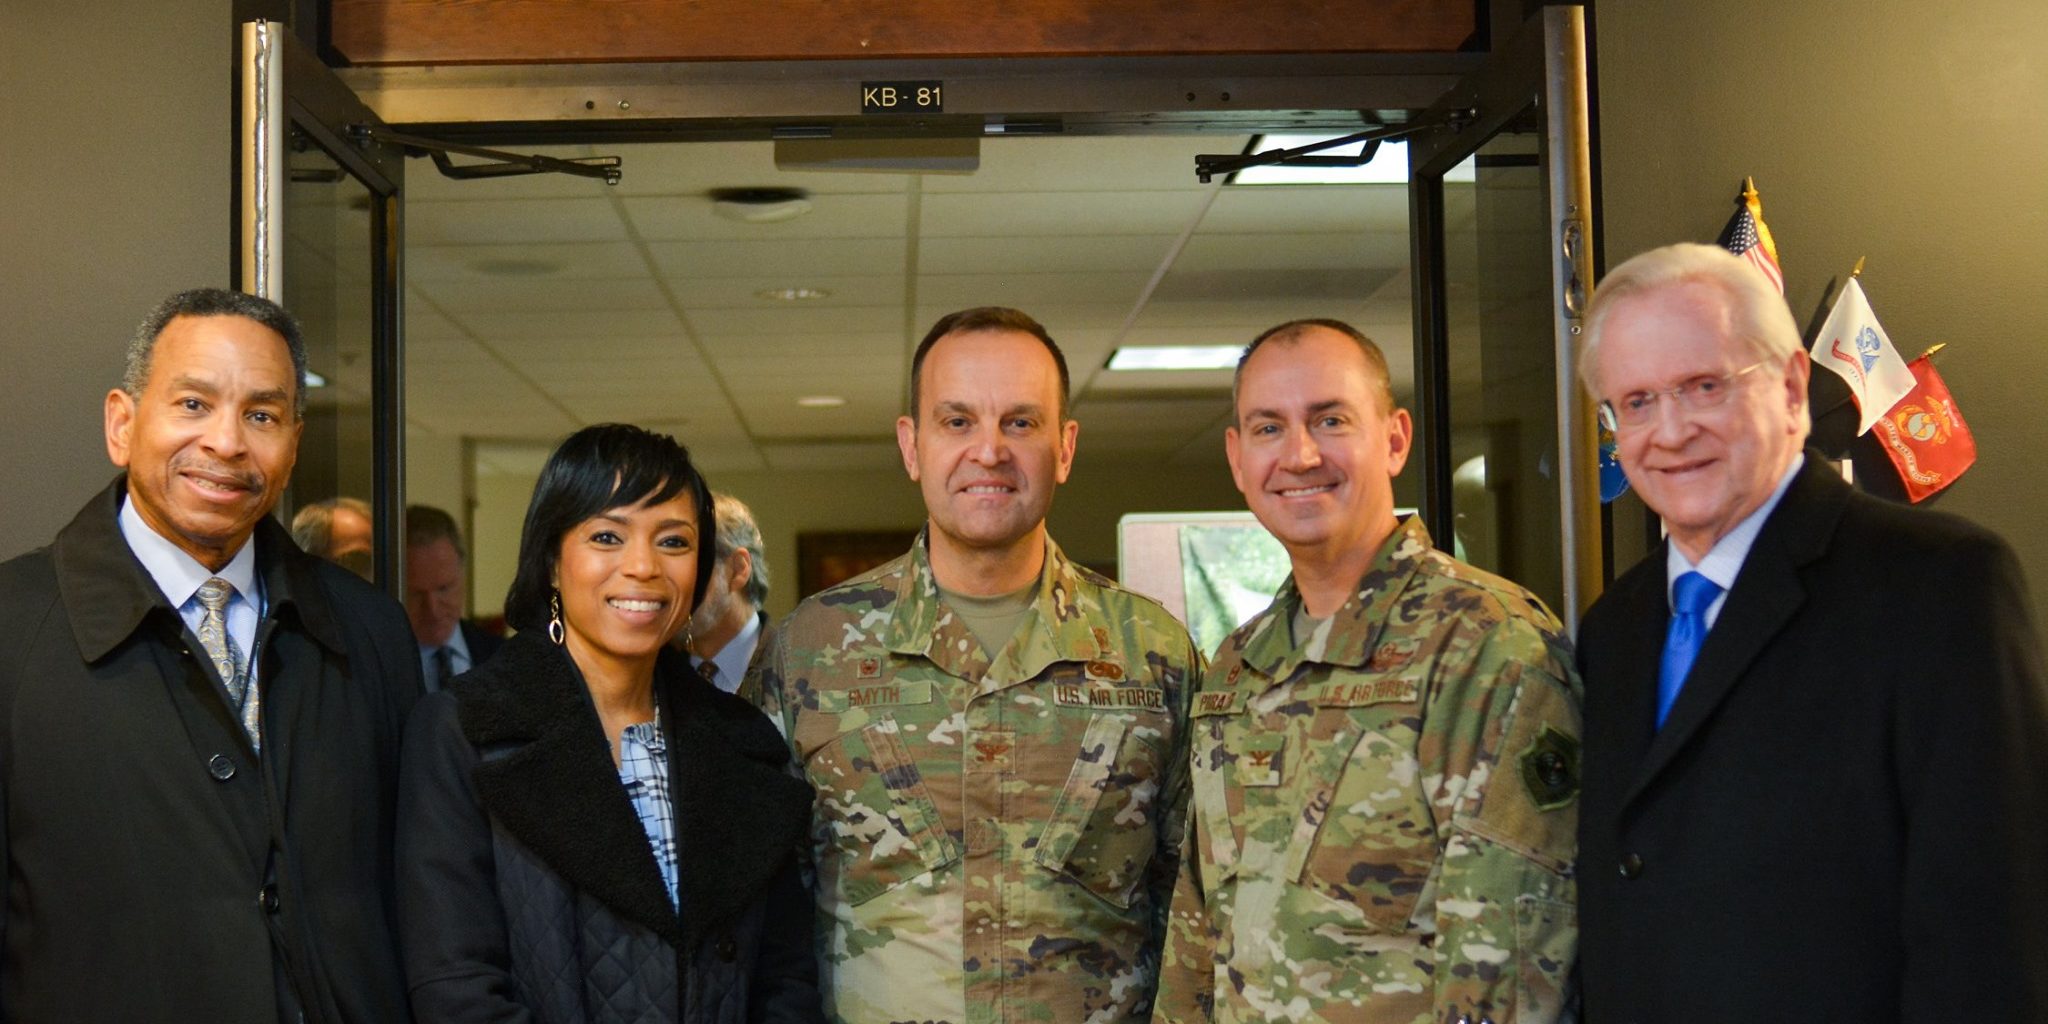 County Executive Angela Alsobrooks (Second from left) is joined by Roundtable President/CEO M.H. Jim Estepp (Right), Joint Base Andrews Commander Col. Andrew Purath (Second from right), County CAO Major Riddick (Left) and Col. Smyth (Center)  outside of the Roundtable's Maryland Room at the Aeromedical Staging Facility on Joint Base Andrews.